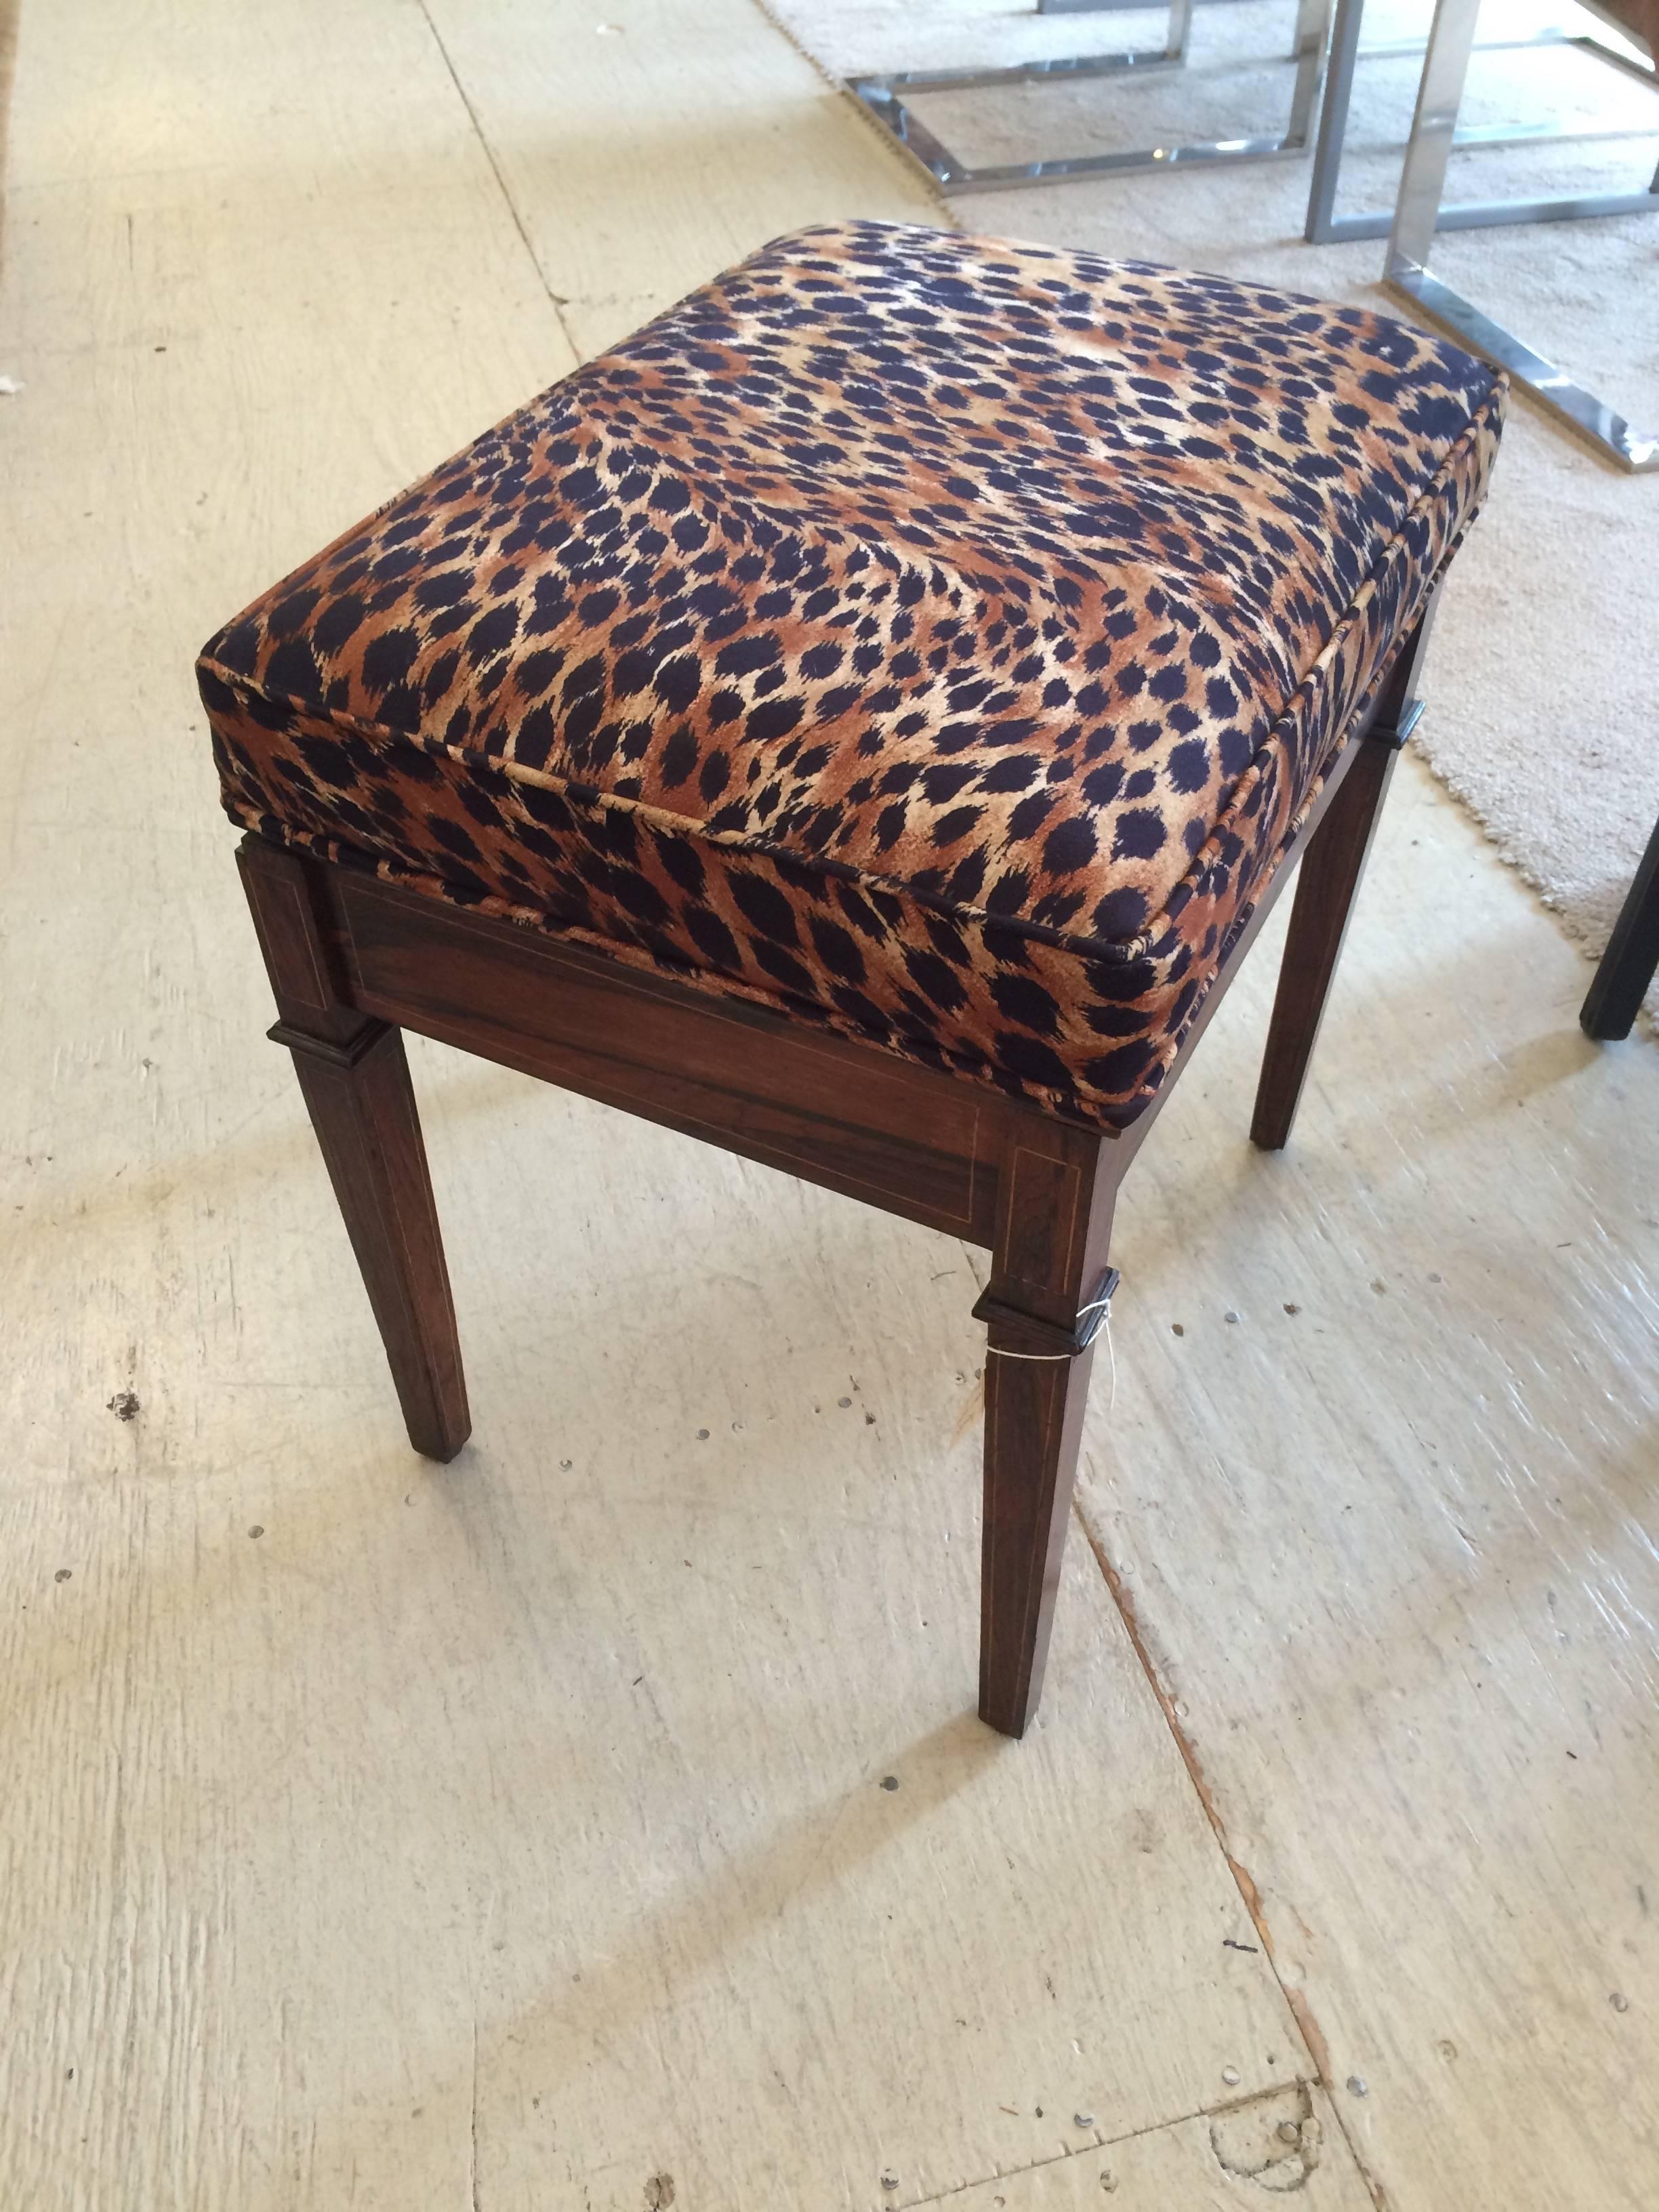 Lovely mahogany base with pretty Greek urn and curlicue decoration, having a newly upholstered designer faux suede animal print top that lifts up for storage within.

NF